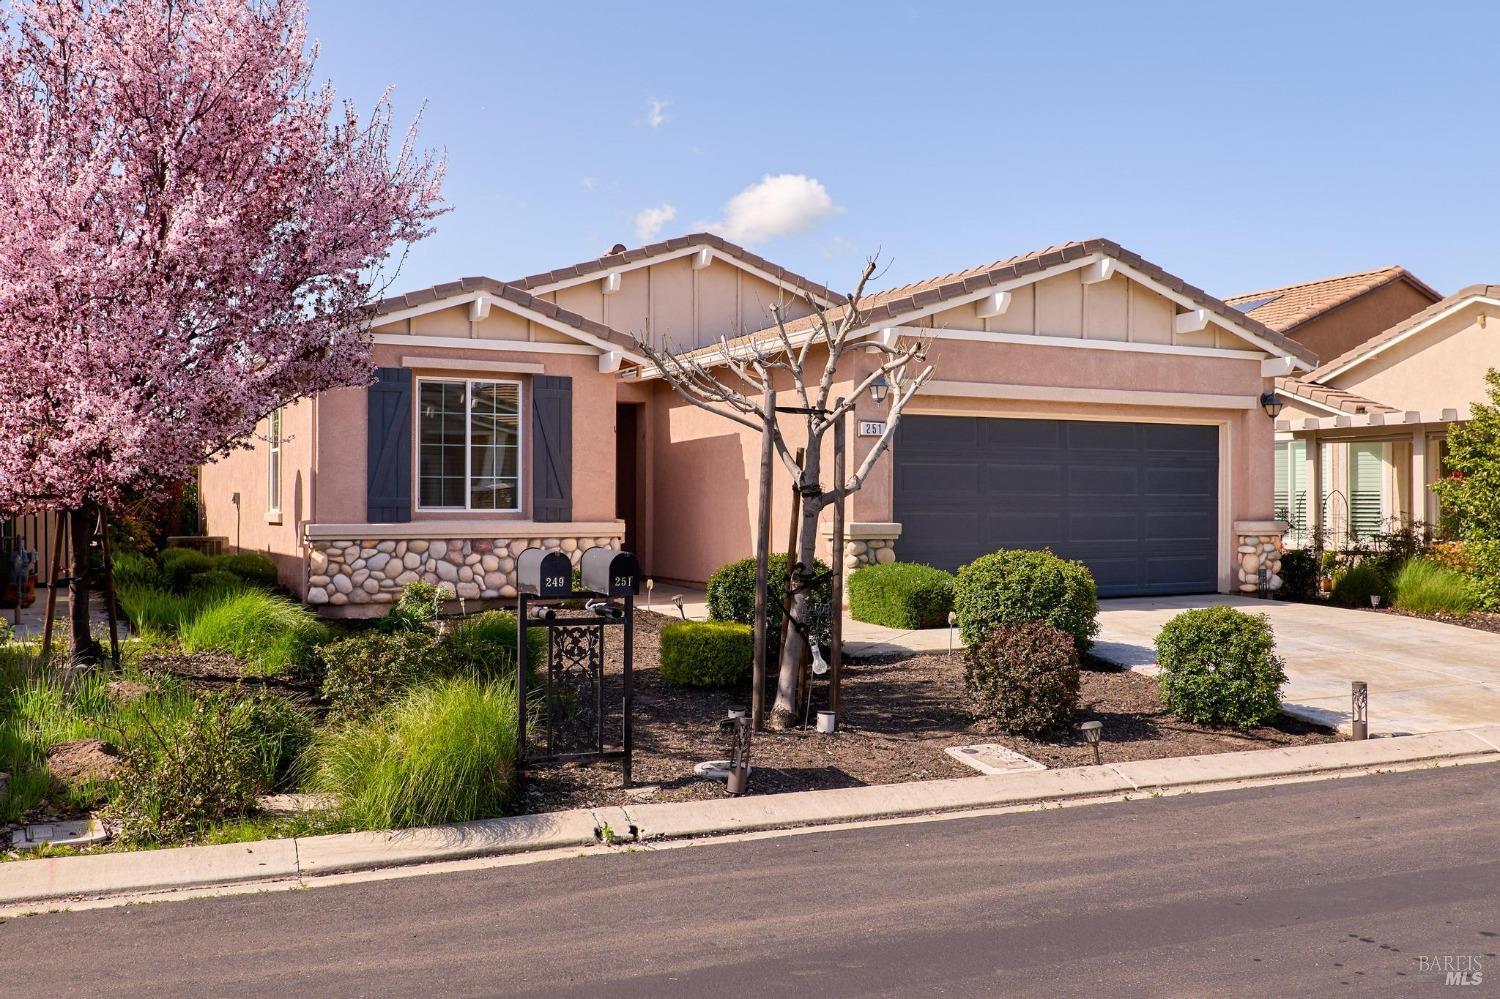 This Trilogy Rio Vista home is set on a nice low maintenance lot with spacious back yard with no vis